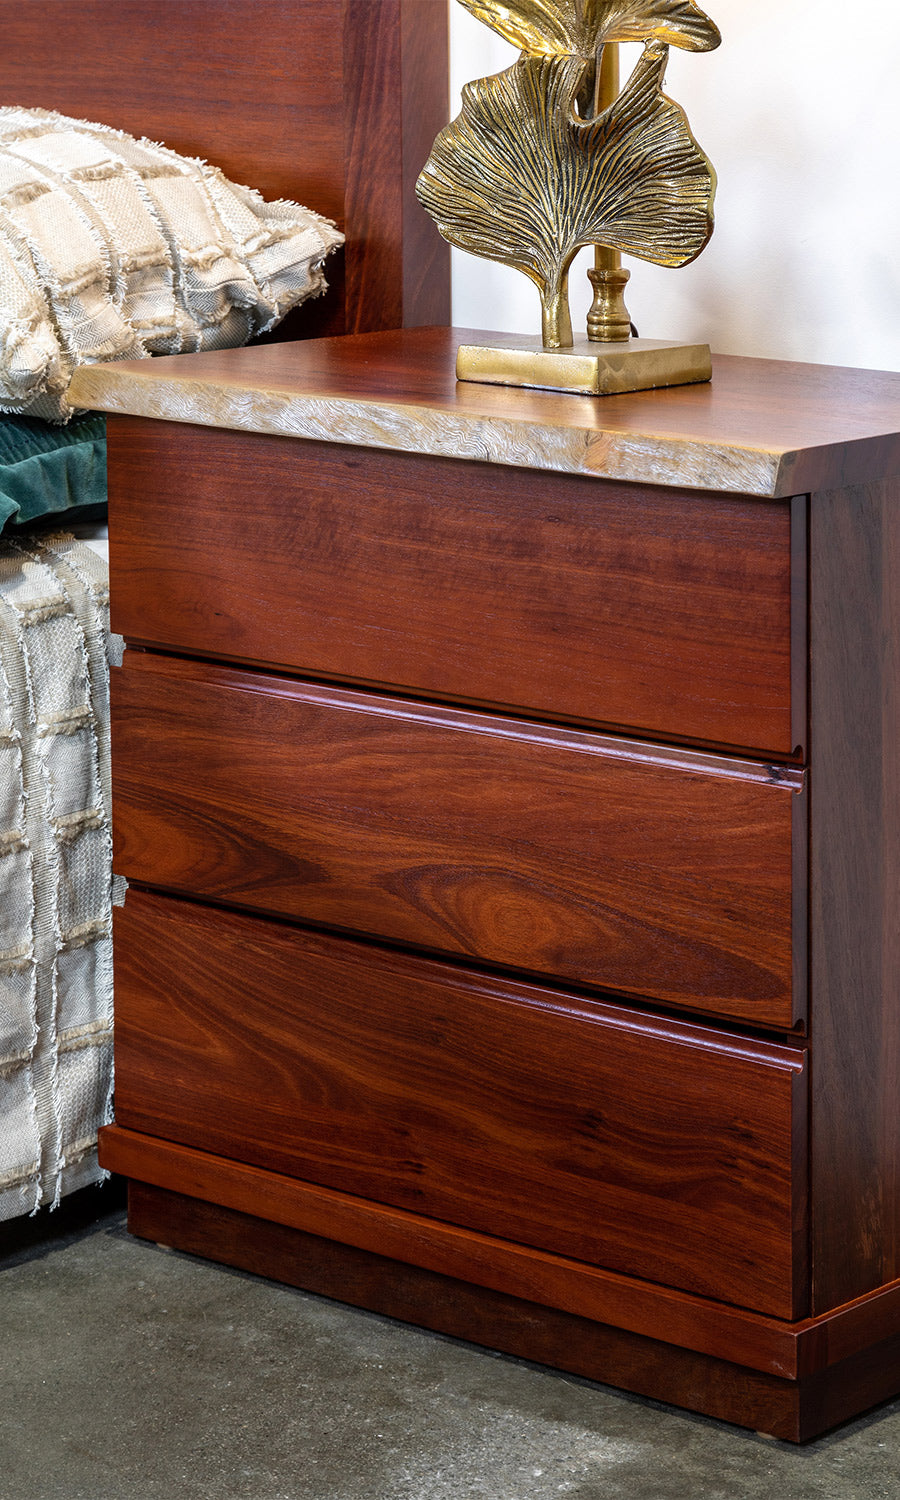 Naturaliste Natural Edge Solid Jarrah Timber Three Drawer Bedside Tables Bedroom Suite Made in Perth, WA